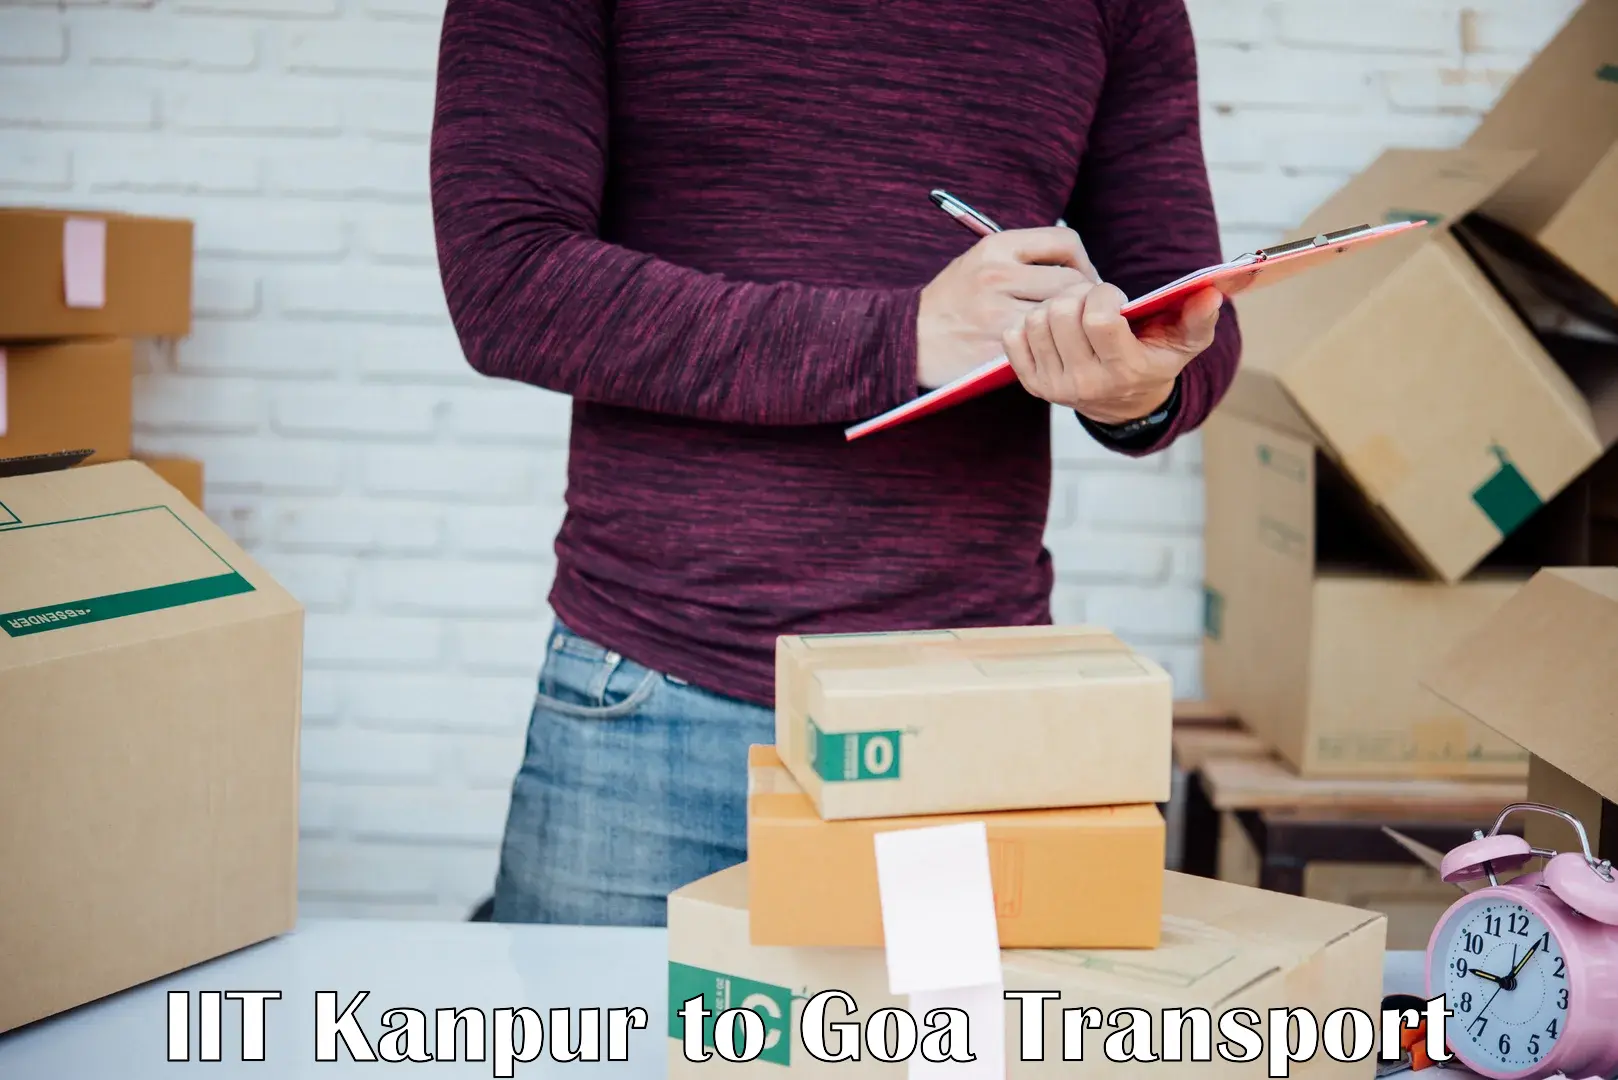 Delivery service IIT Kanpur to NIT Goa